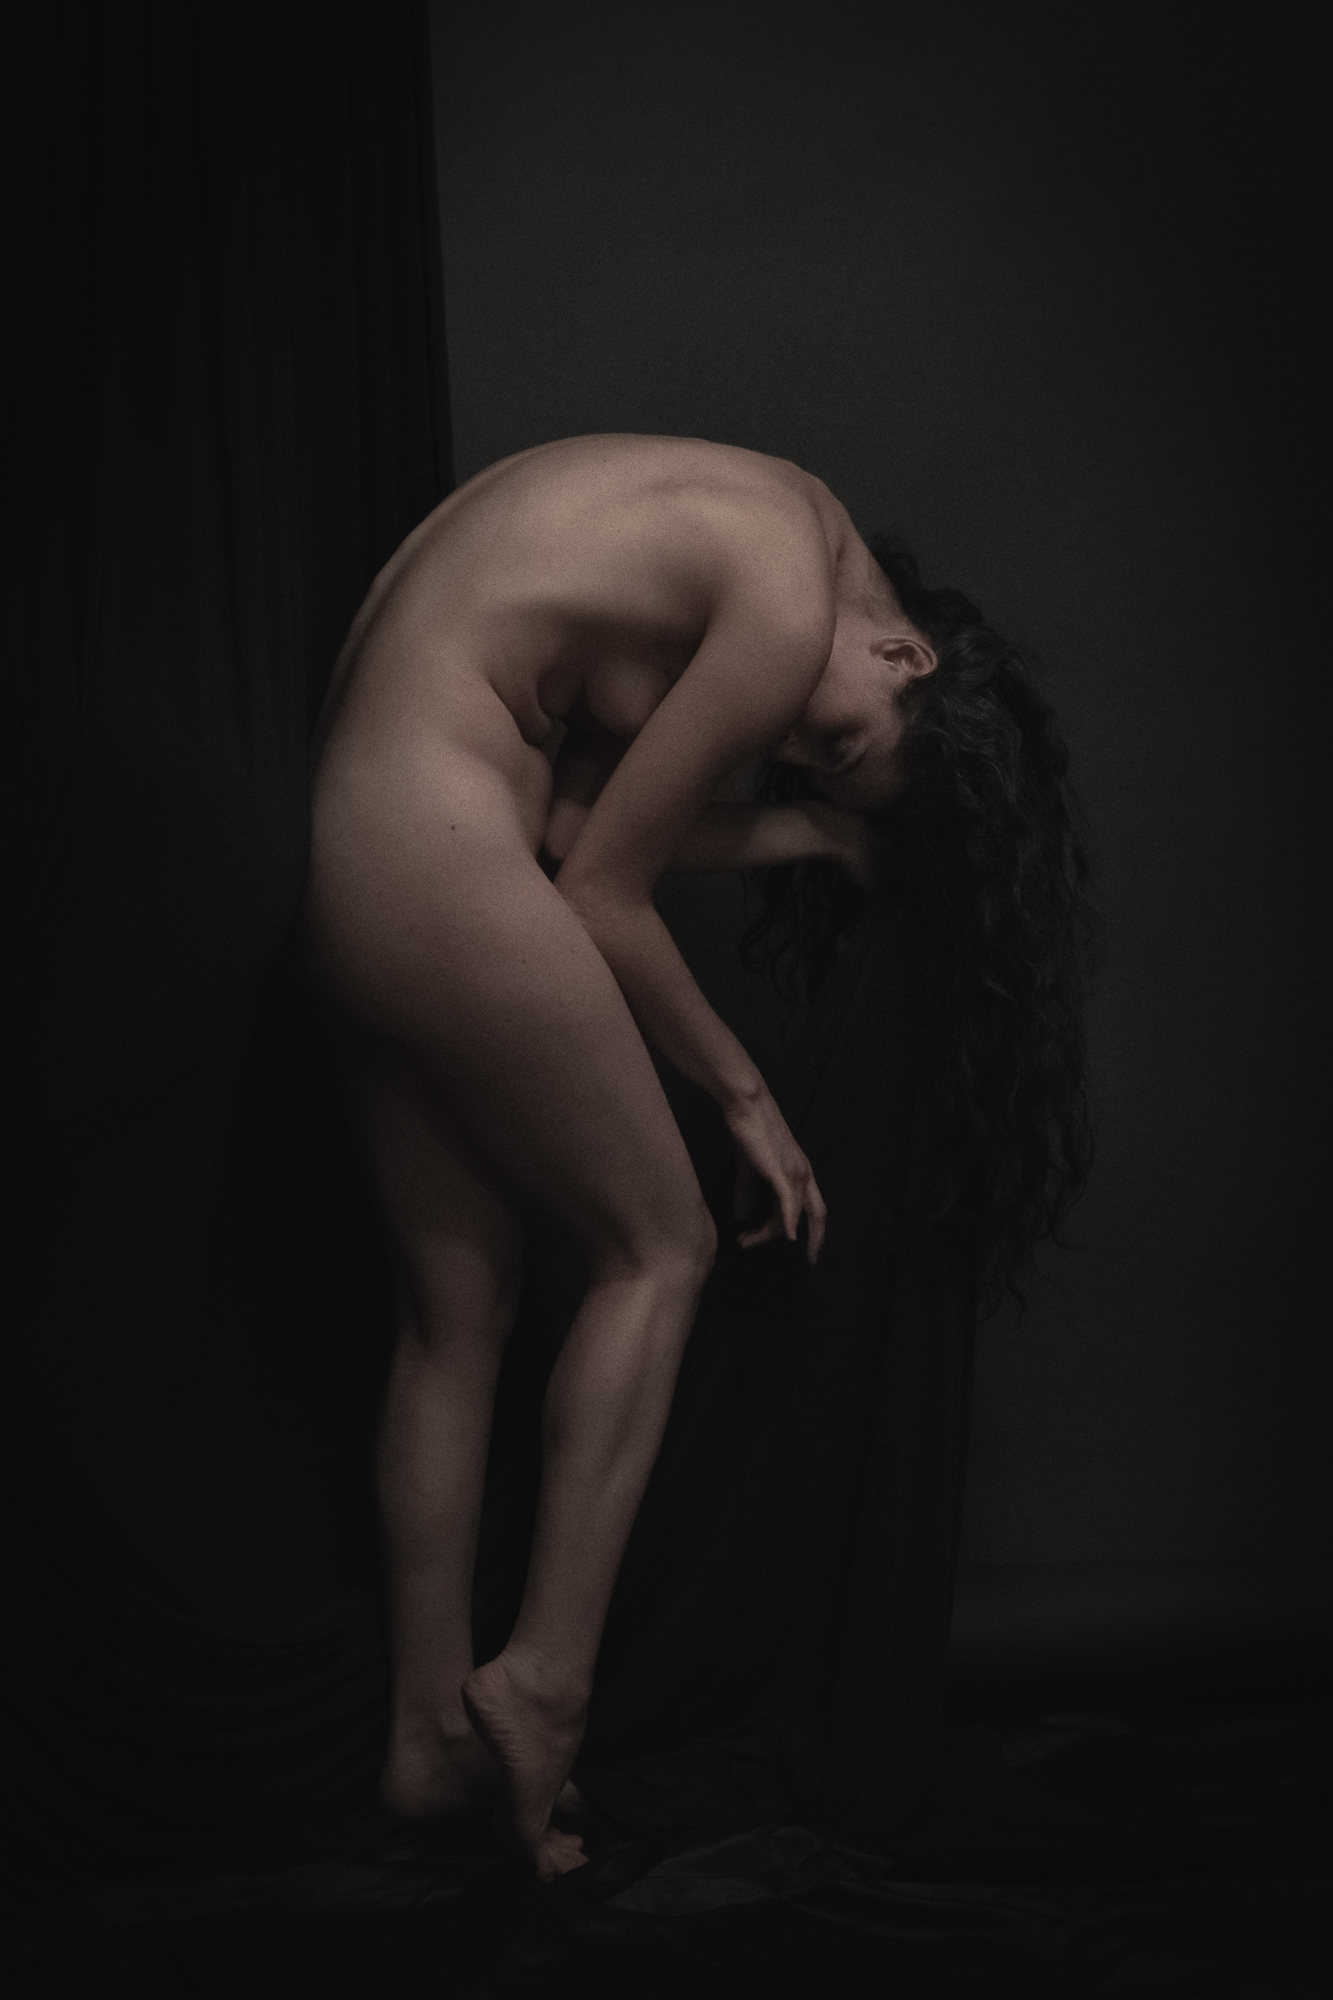 3-15th pollux awards-Nude